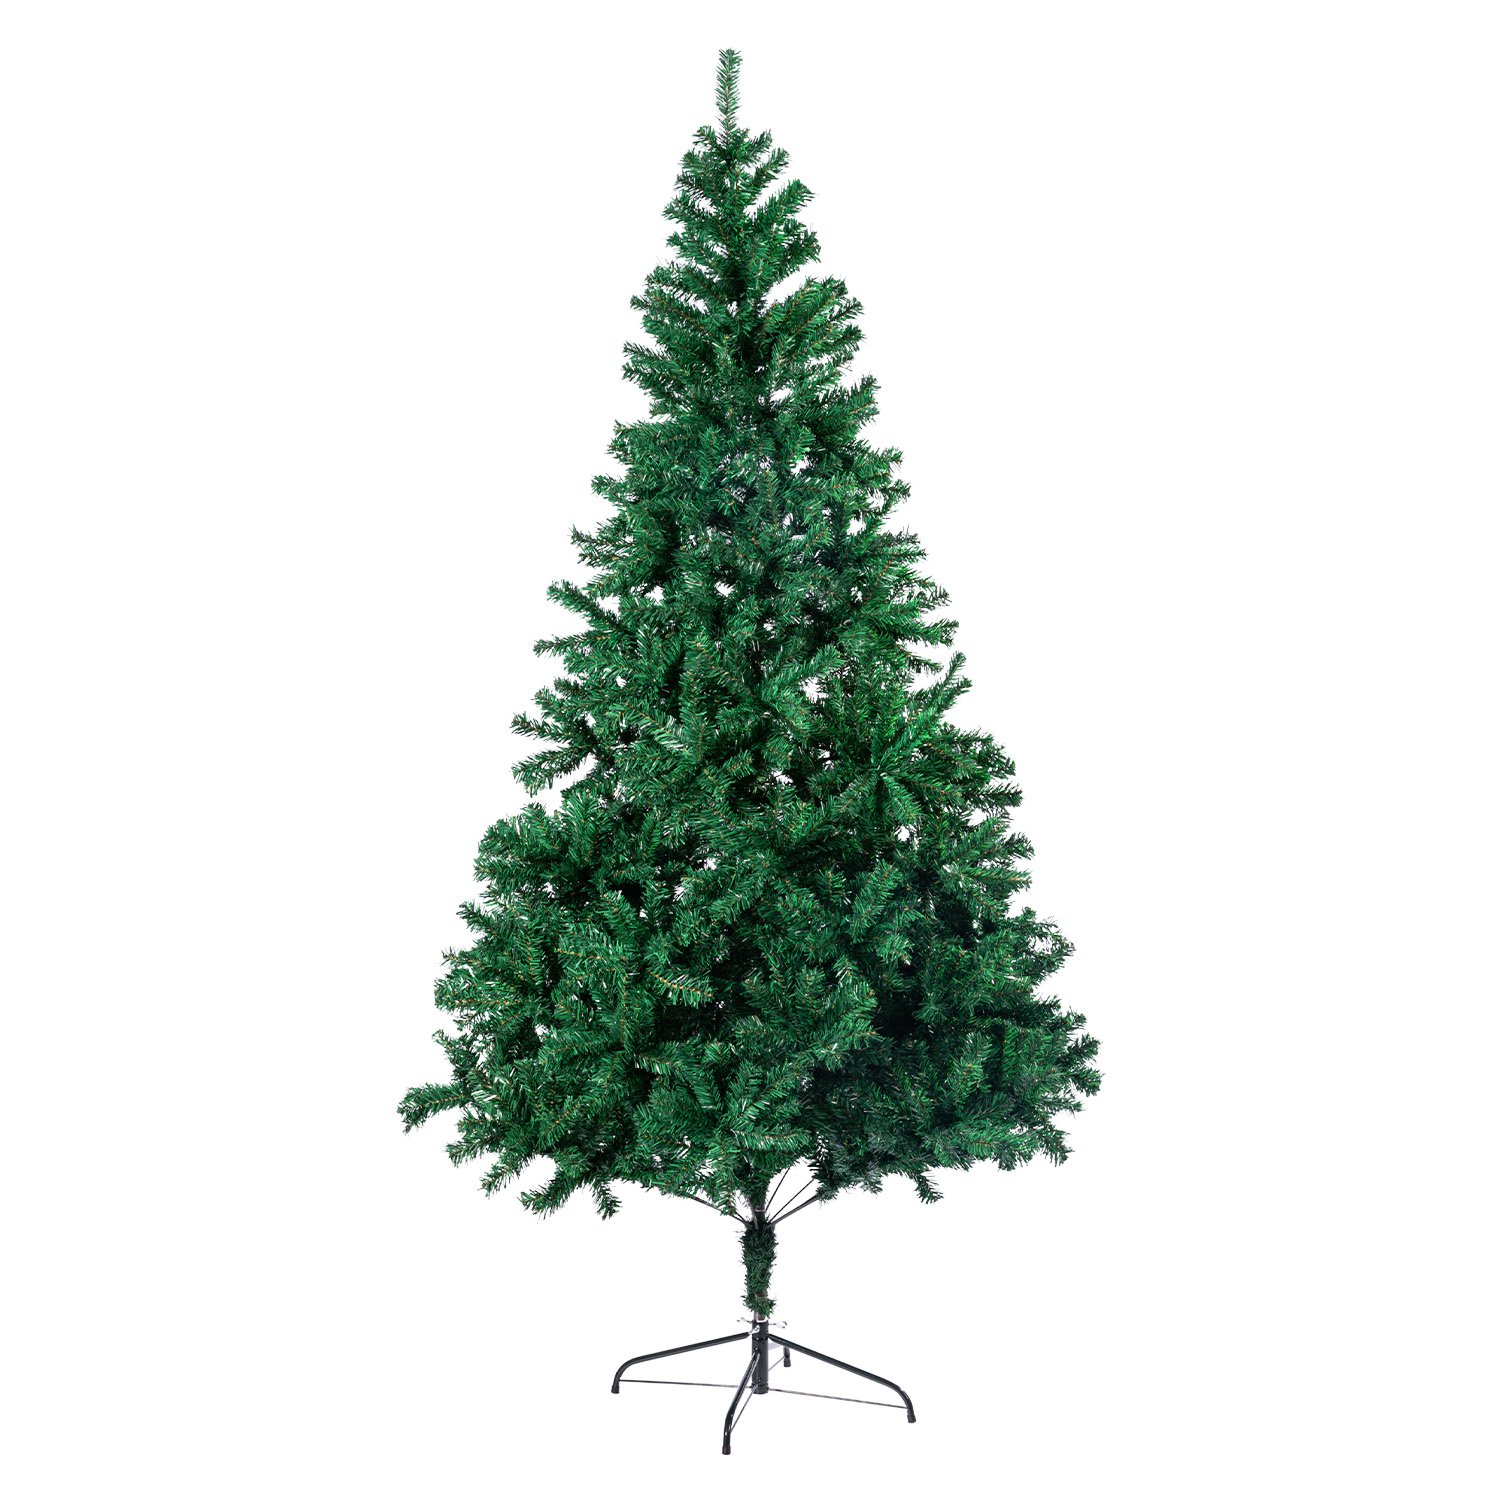 Christabelle Green Artificial Christmas Tree 2.4m - 1500 Tips 1